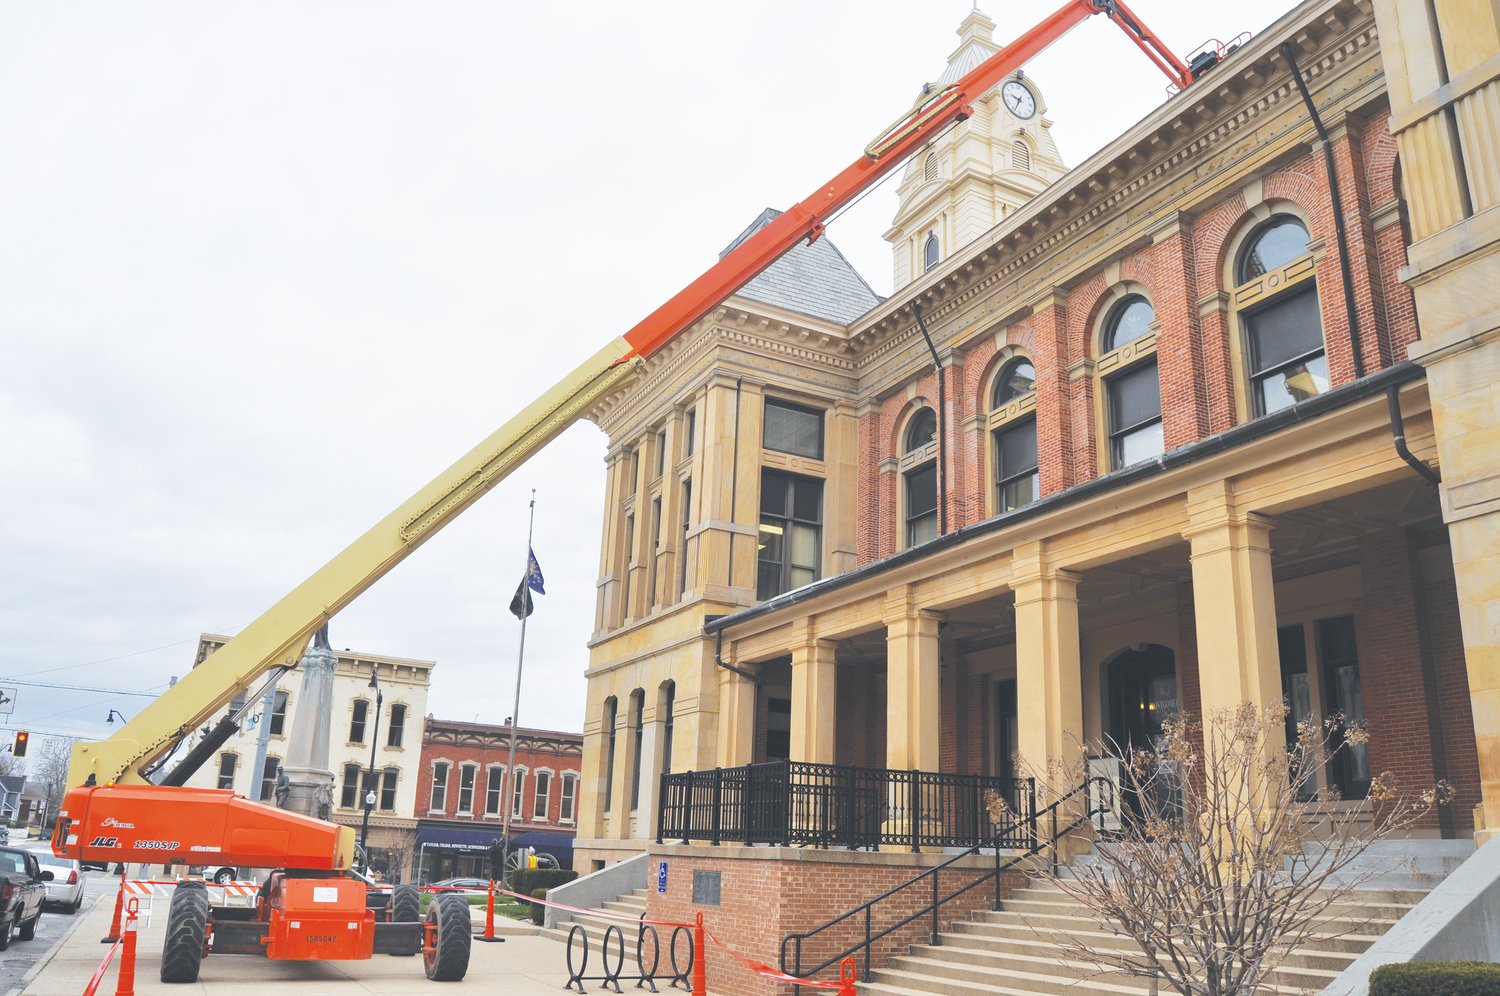 A crane touches the roof of the Montgomery County Courthouse Tuesday. Crews from South Bend-based Midland Engineering were hired to perform gutter repairs on the courthouse. The sidewalk was closed on the south side of the building during the repairs.